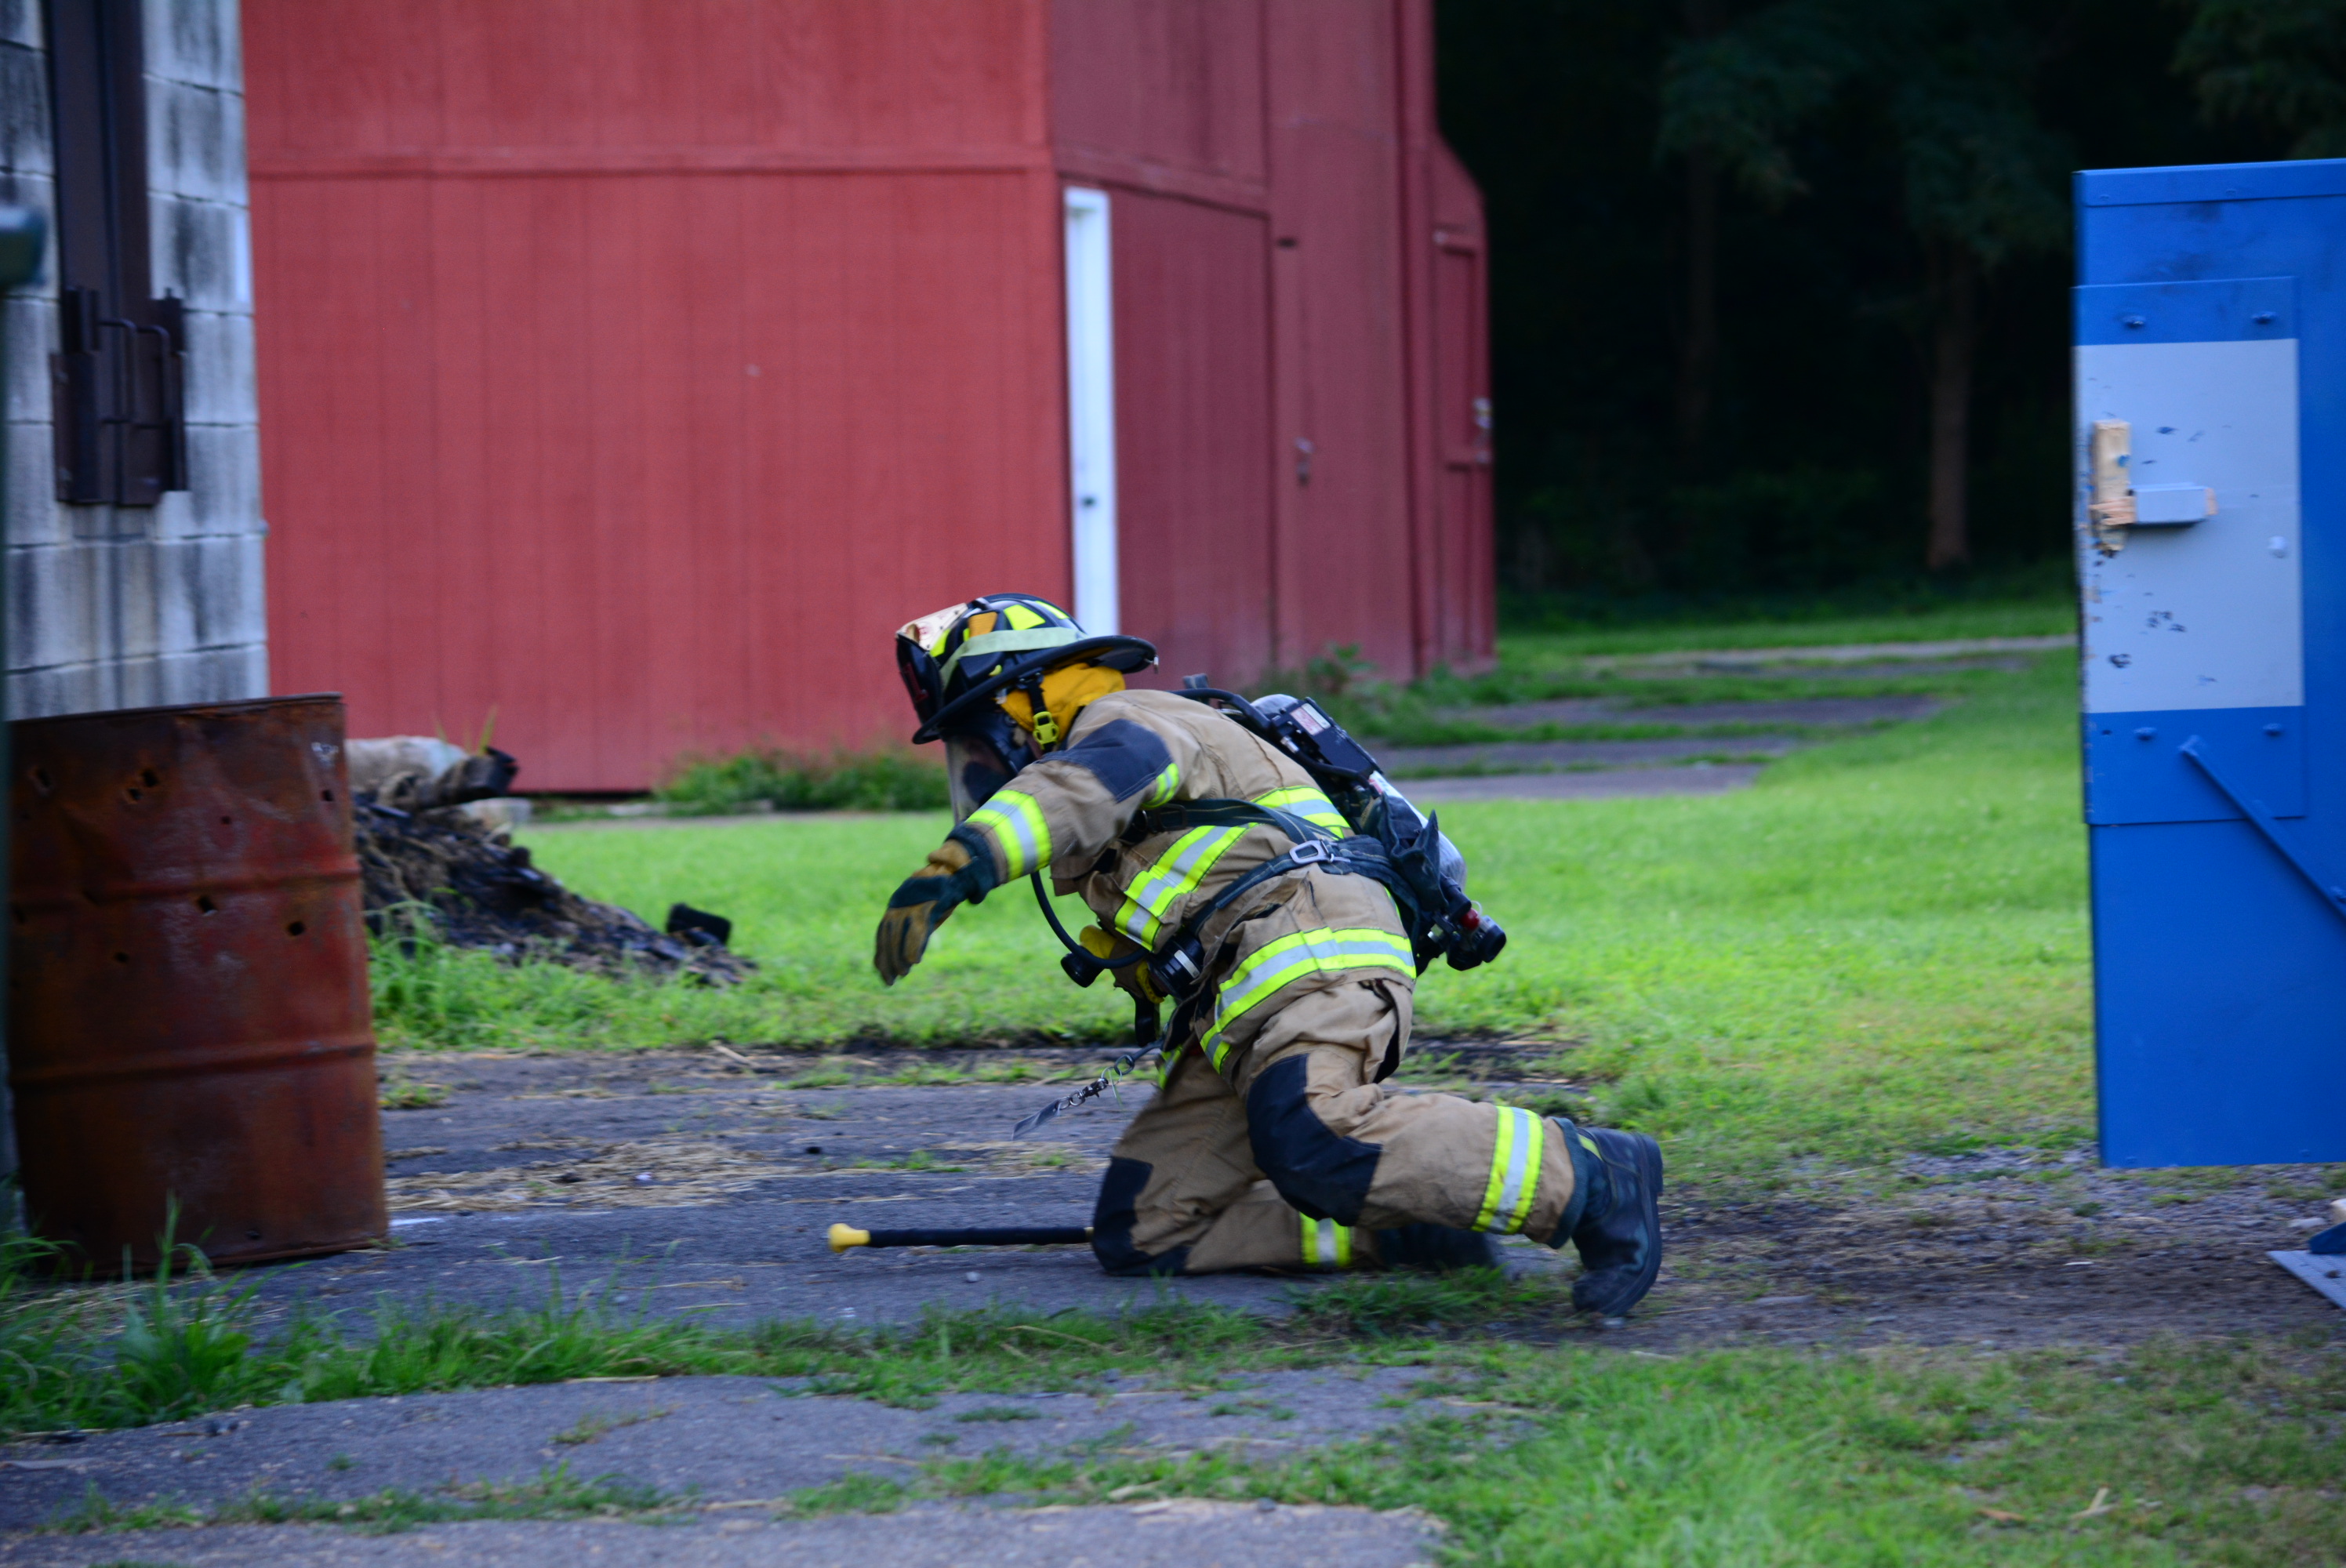 07-31-17  Training - Forceable Entry And Simulated Live Burn Vestal